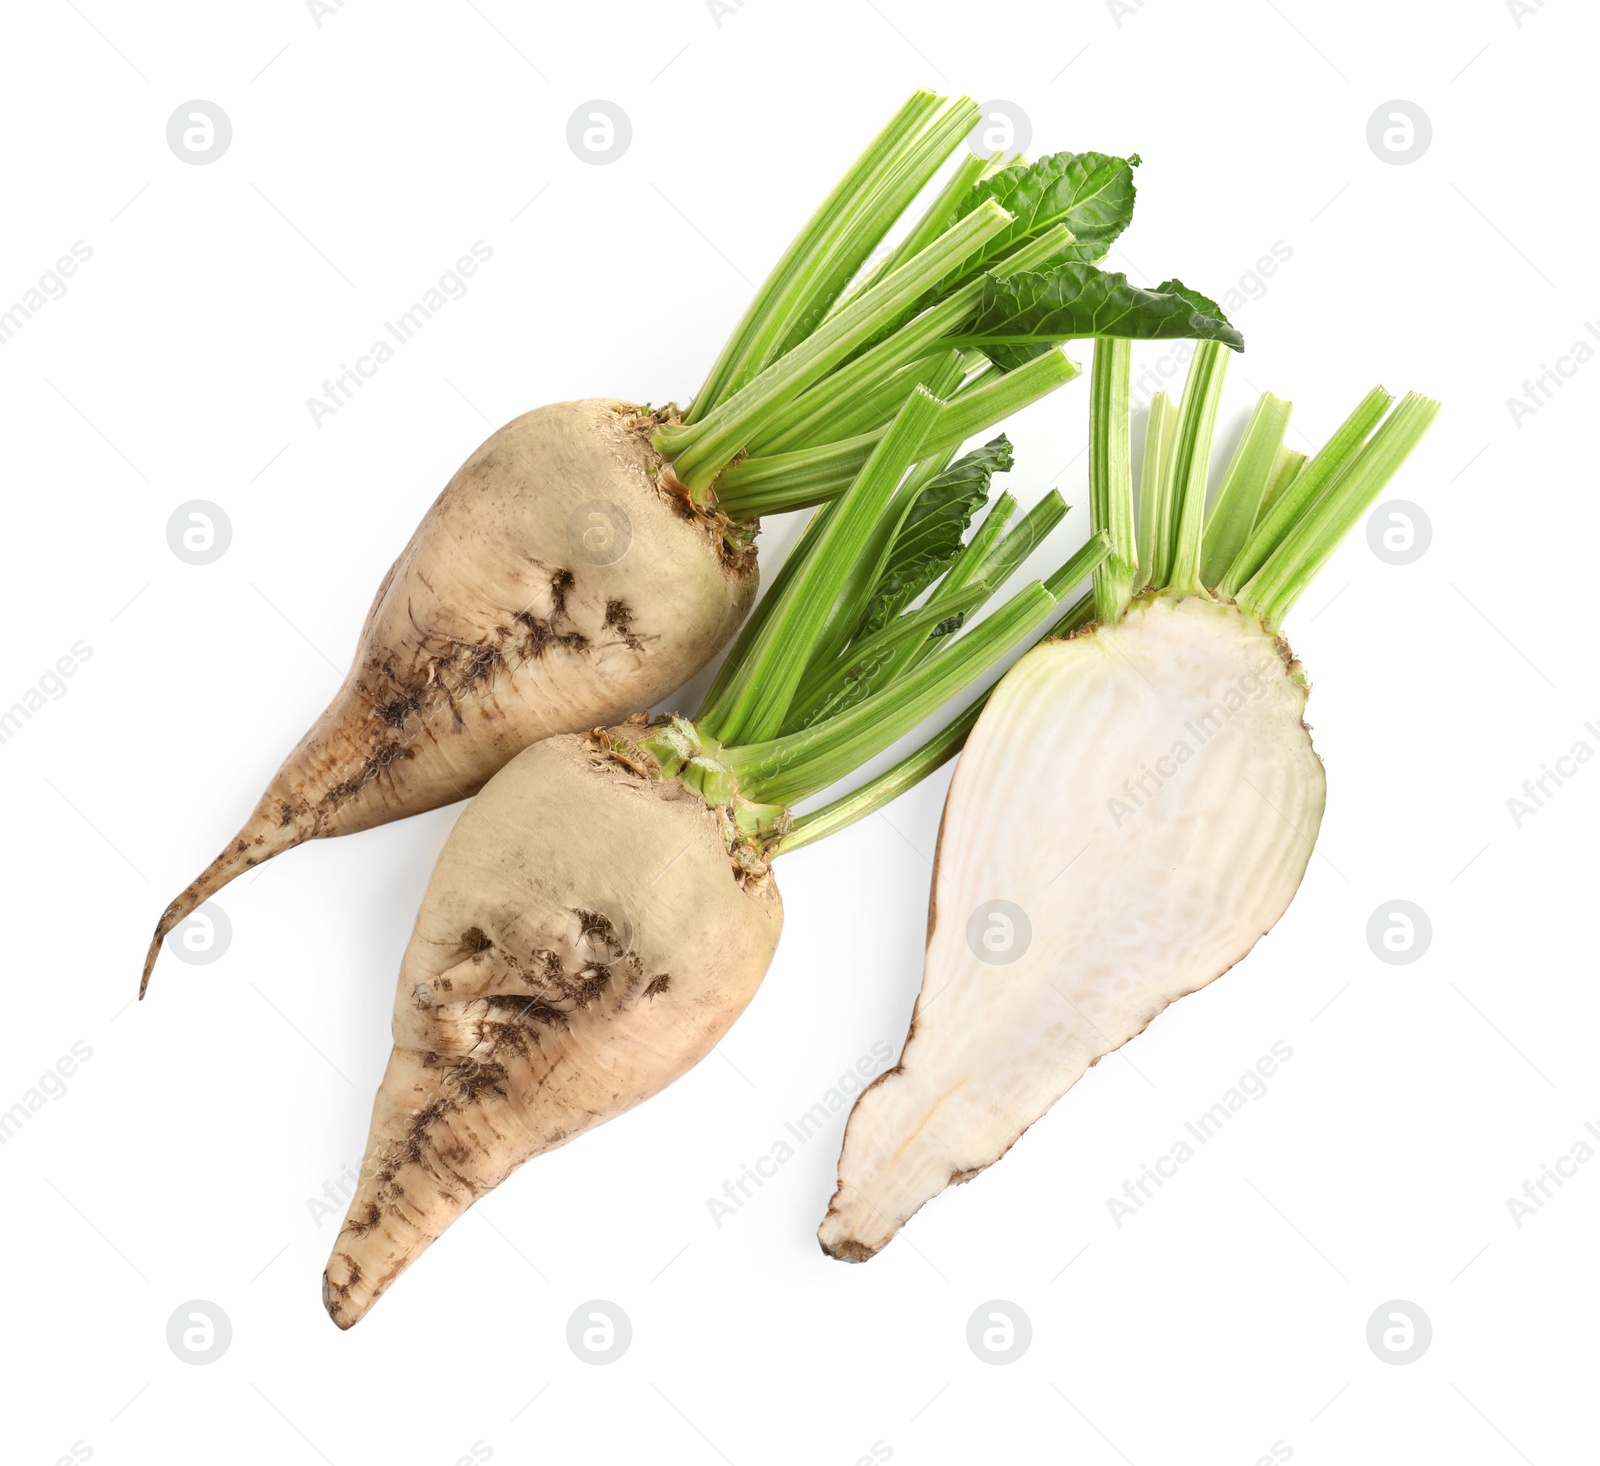 Photo of Whole and cut sugar beets on white background, top view